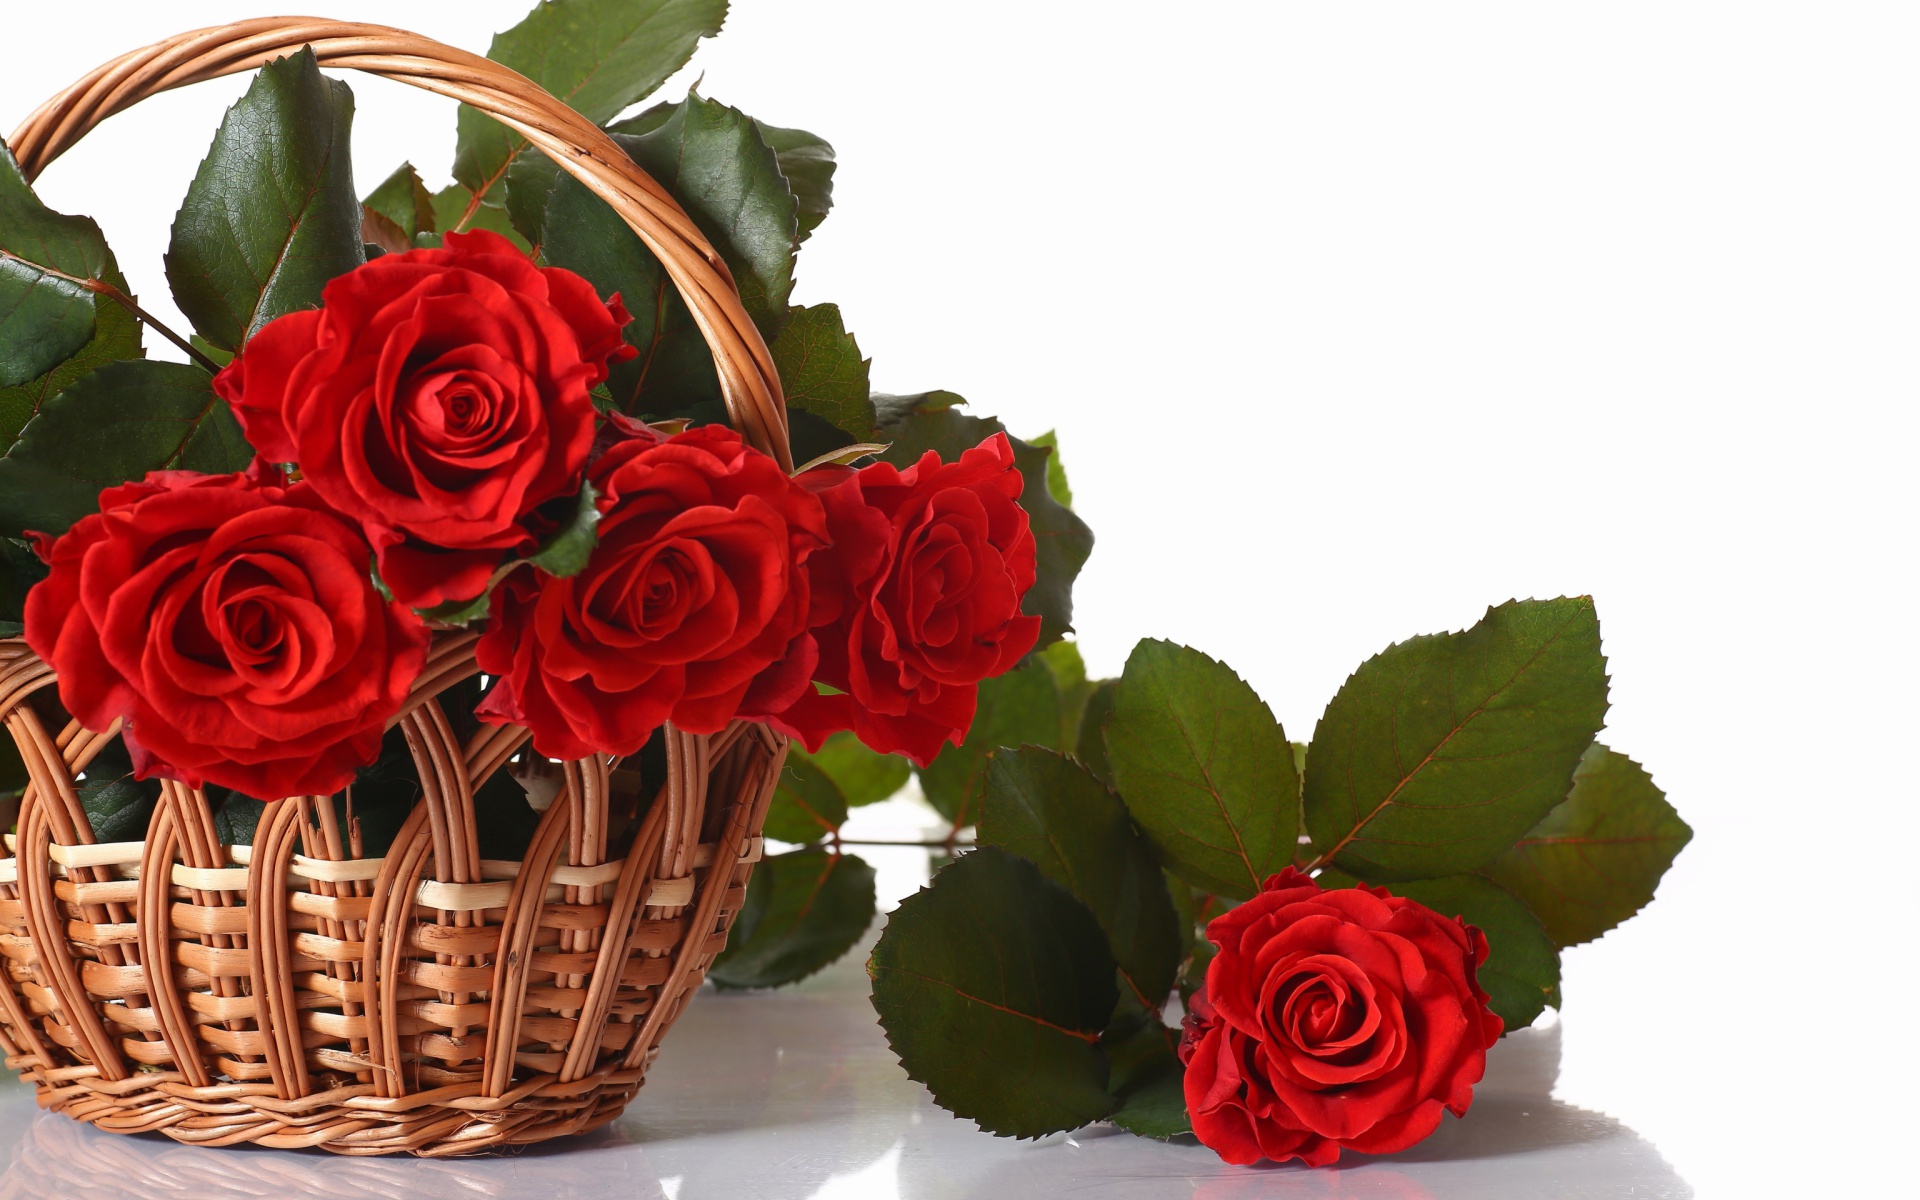 Basket with Roses wallpaper 1920x1200